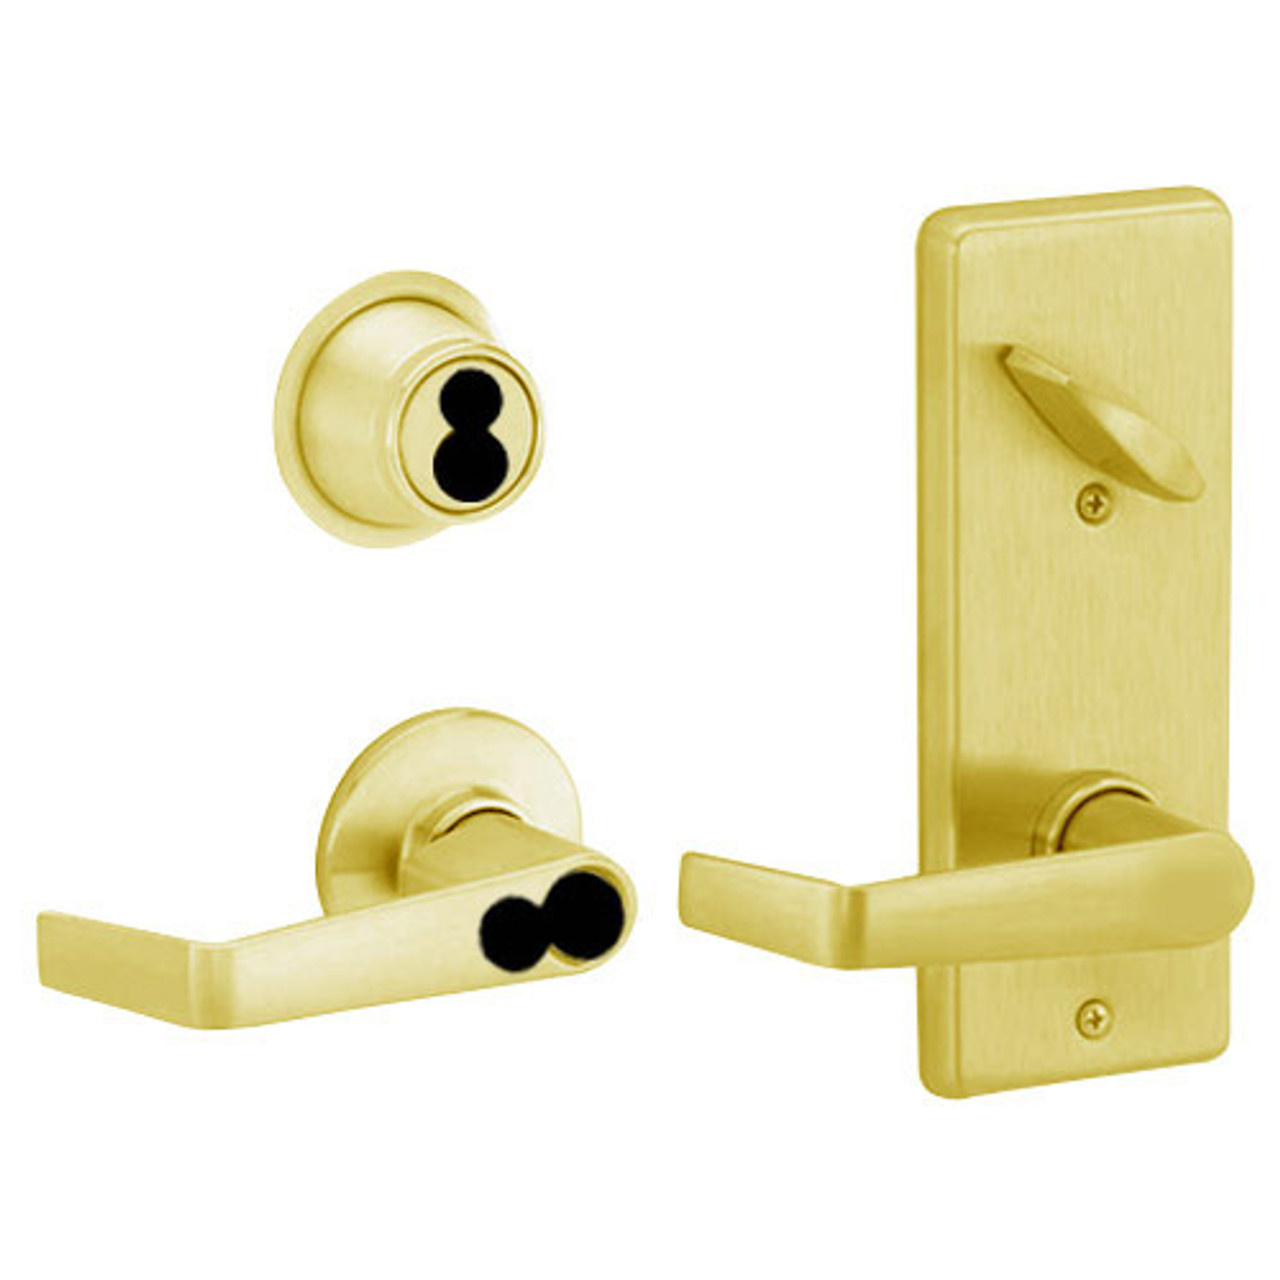 S270JD-SAT-605 Schlage S270PD Saturn Style Interconnected Lock in Bright Brass